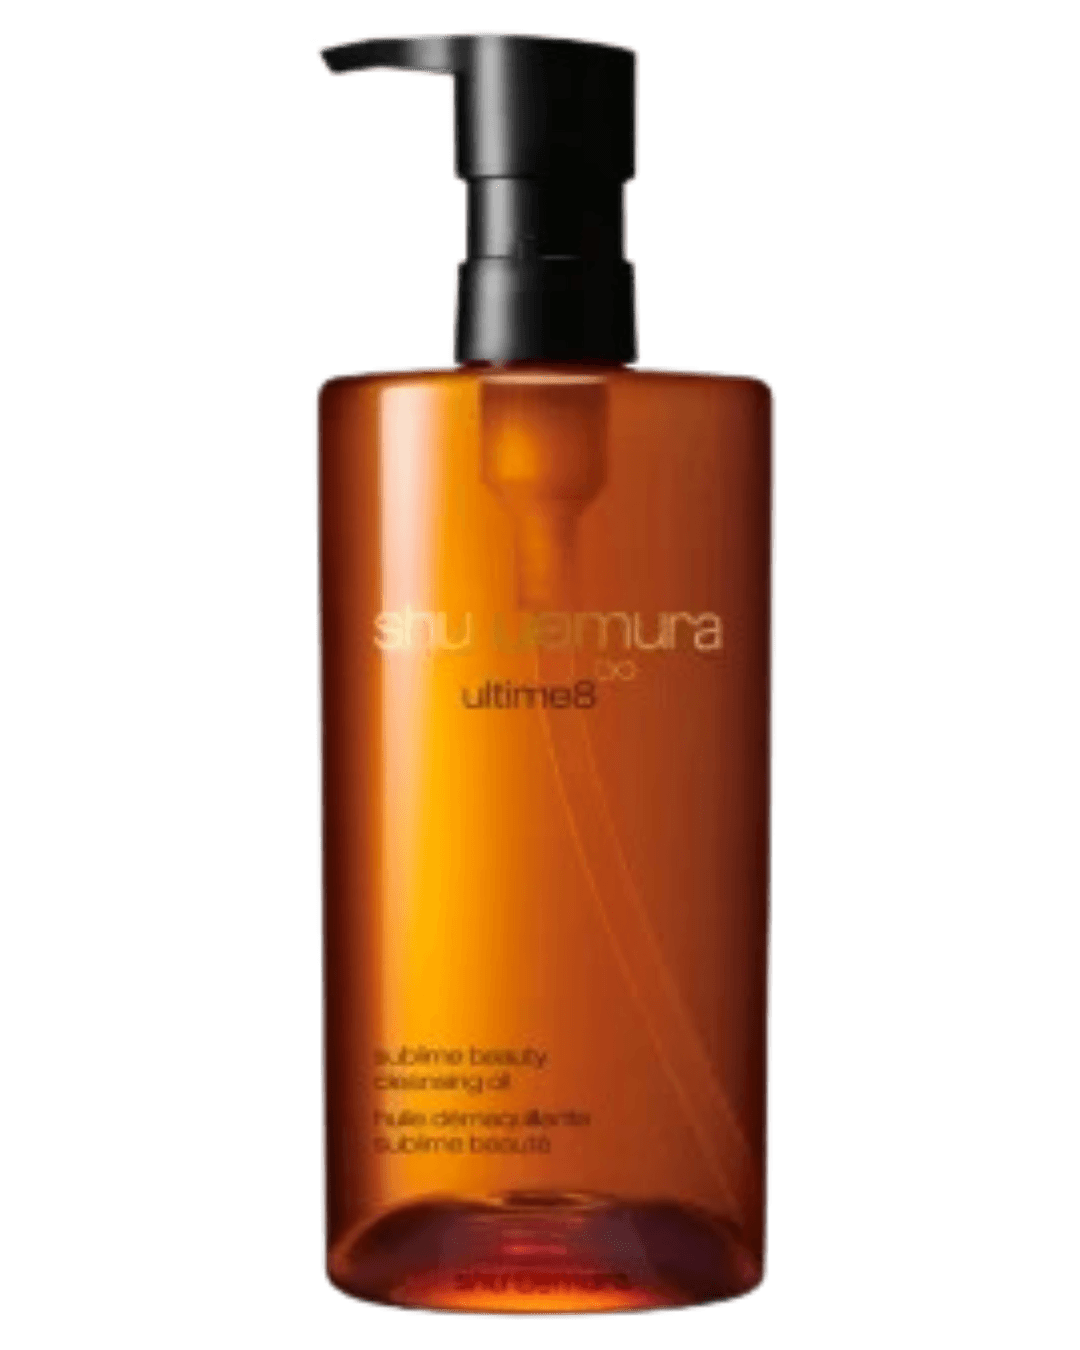 Daily Vanity Beauty Awards 2024 Best Make up Shu Uemura Ultime8 Sublime Beauty Cleansing Oil Voted By Beauty Experts